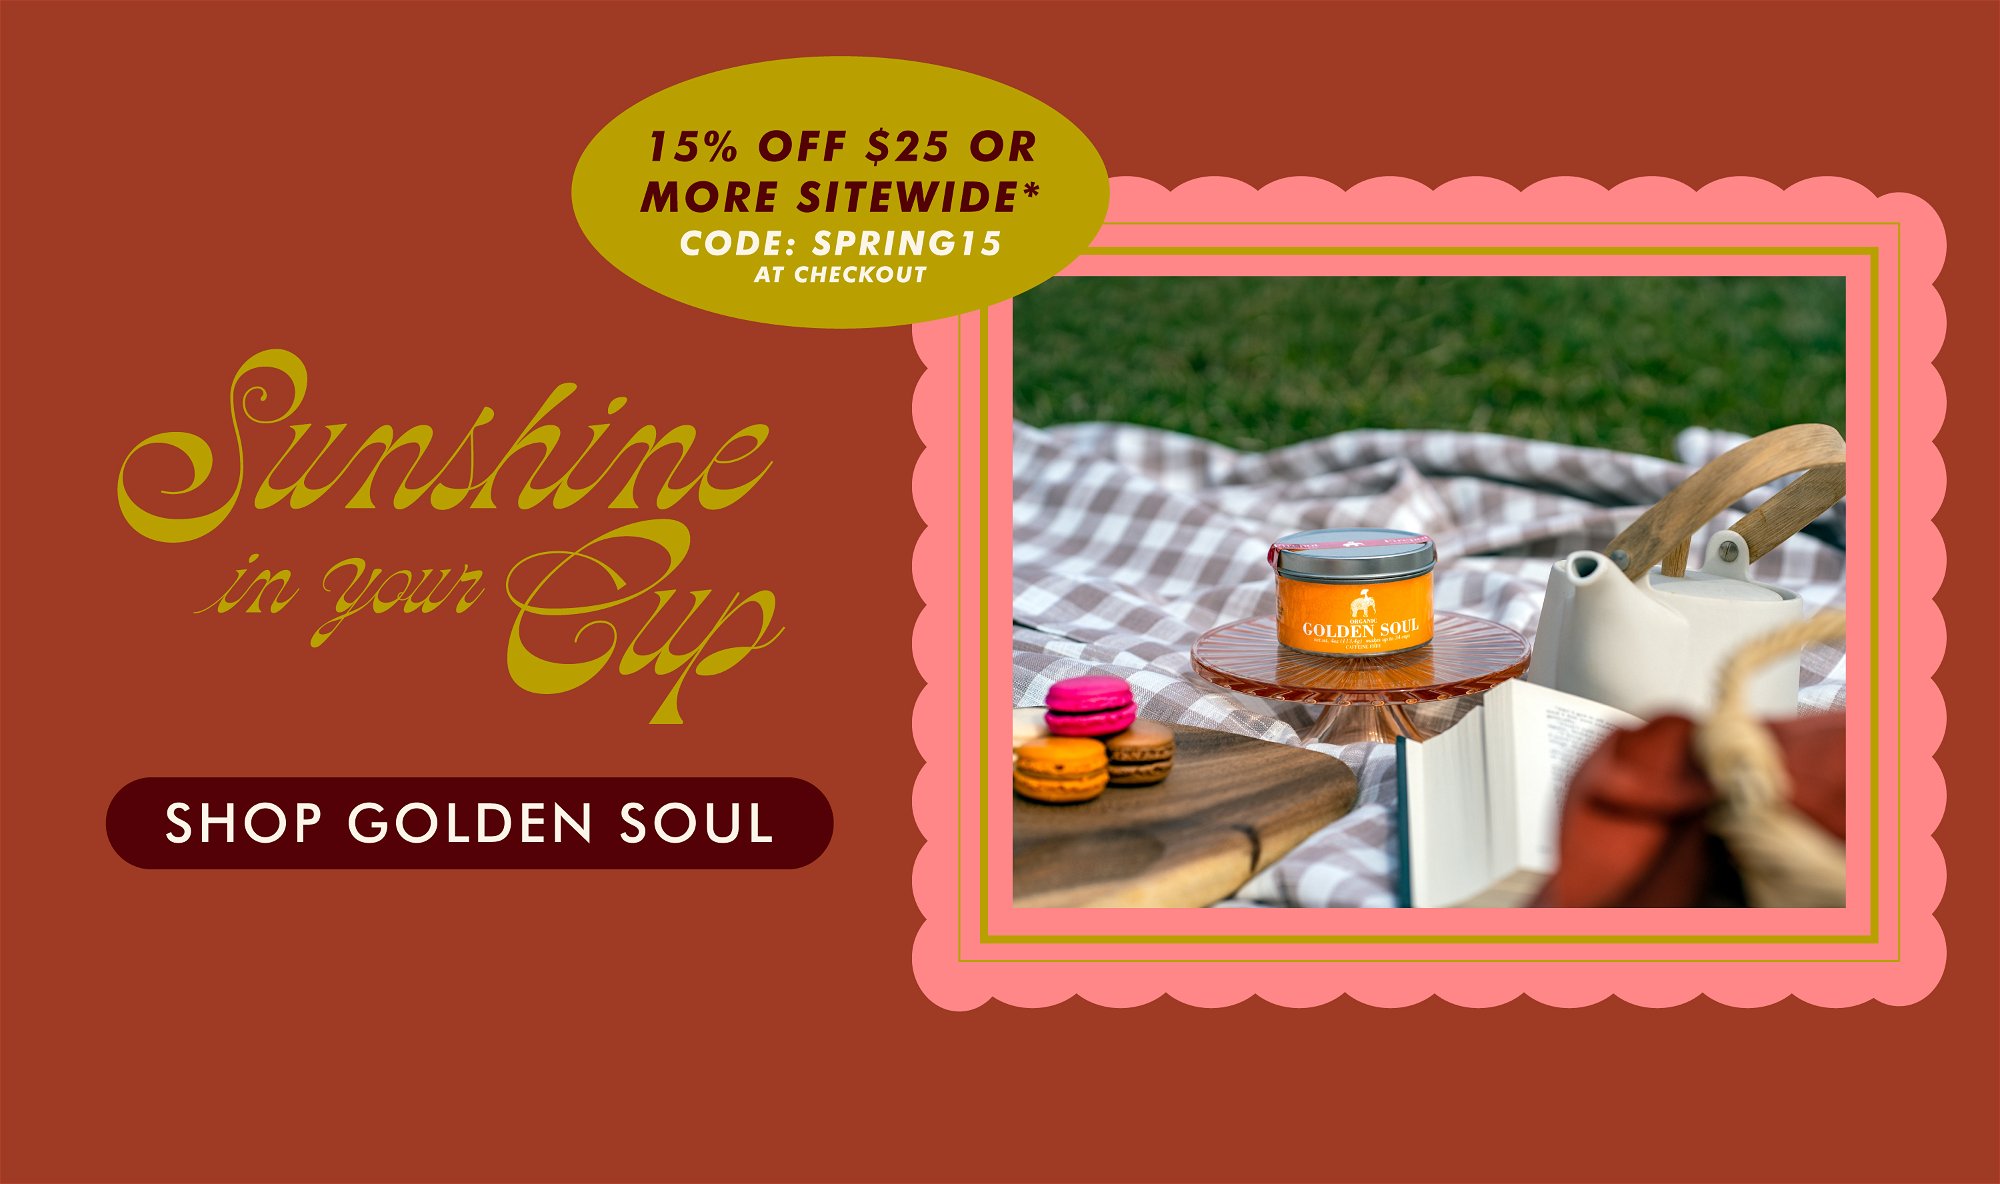 15% off $25 or more sitewide with code SPRING15. Sunshine in your cup. Shop golden soul